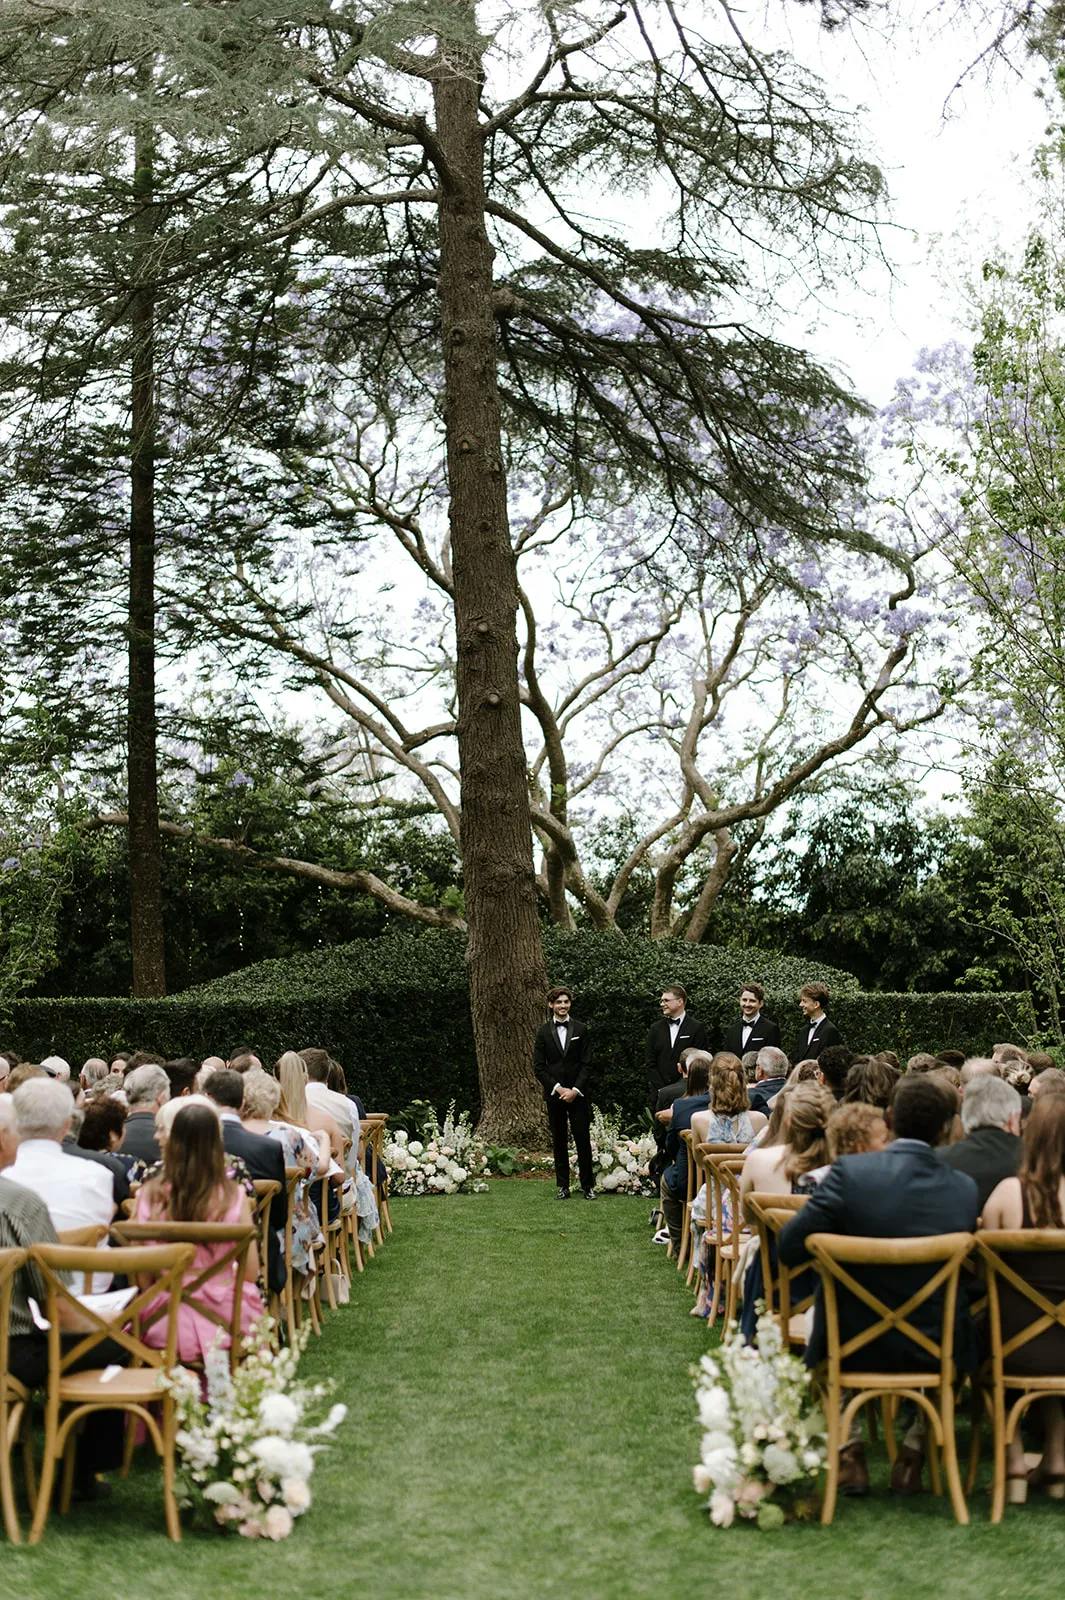 An outdoor wedding ceremony with guests seated on both sides of a grassy aisle, adorned with white flowers. The ceremony takes place under a large tree, where a groom and four groomsmen in suits stand at the end of the aisle, waiting.